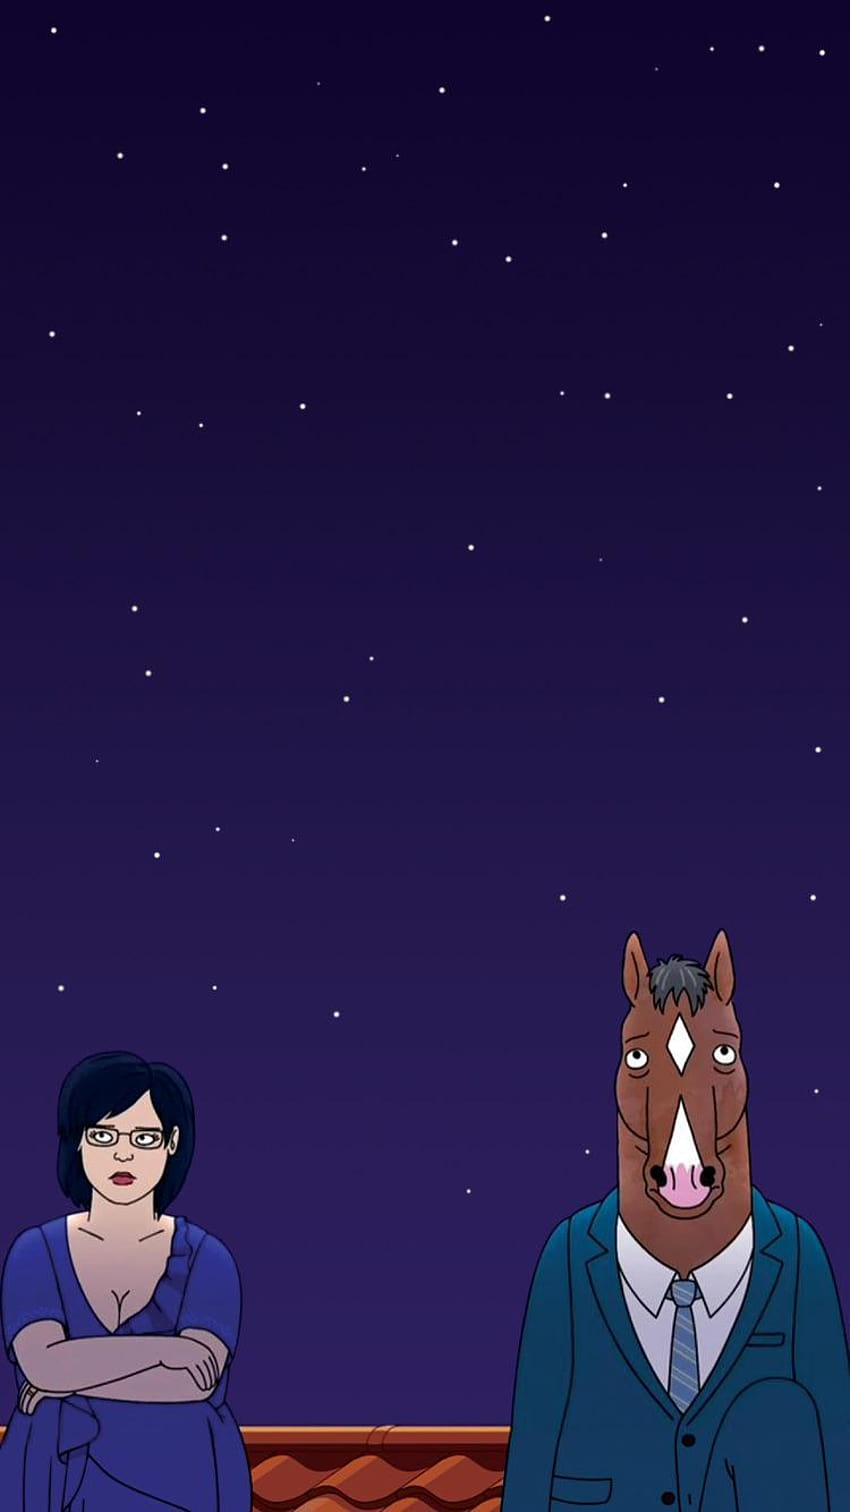 I know a lot of these have been shared, but none of them have worked for me because I have a menu bar on my iPhone that covers BoJack and Diane, diane nguyen HD phone wallpaper